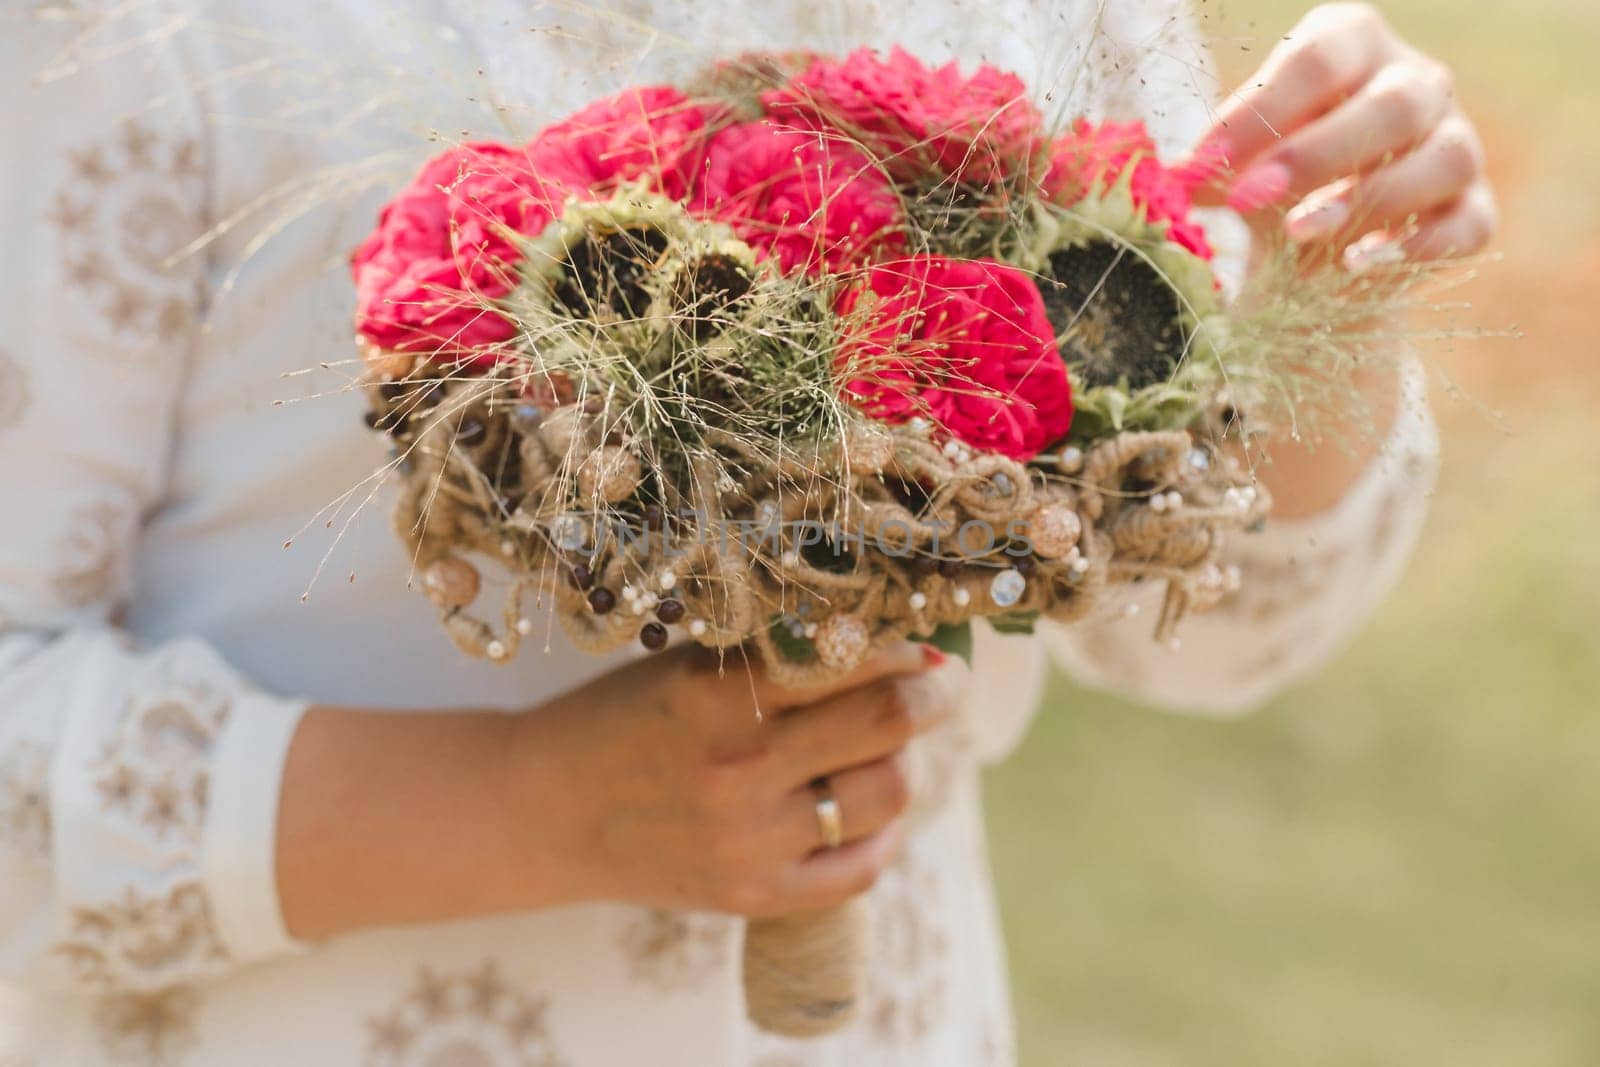 The bride holds her wedding bouquet with red peonies and sunflowers in her hands.